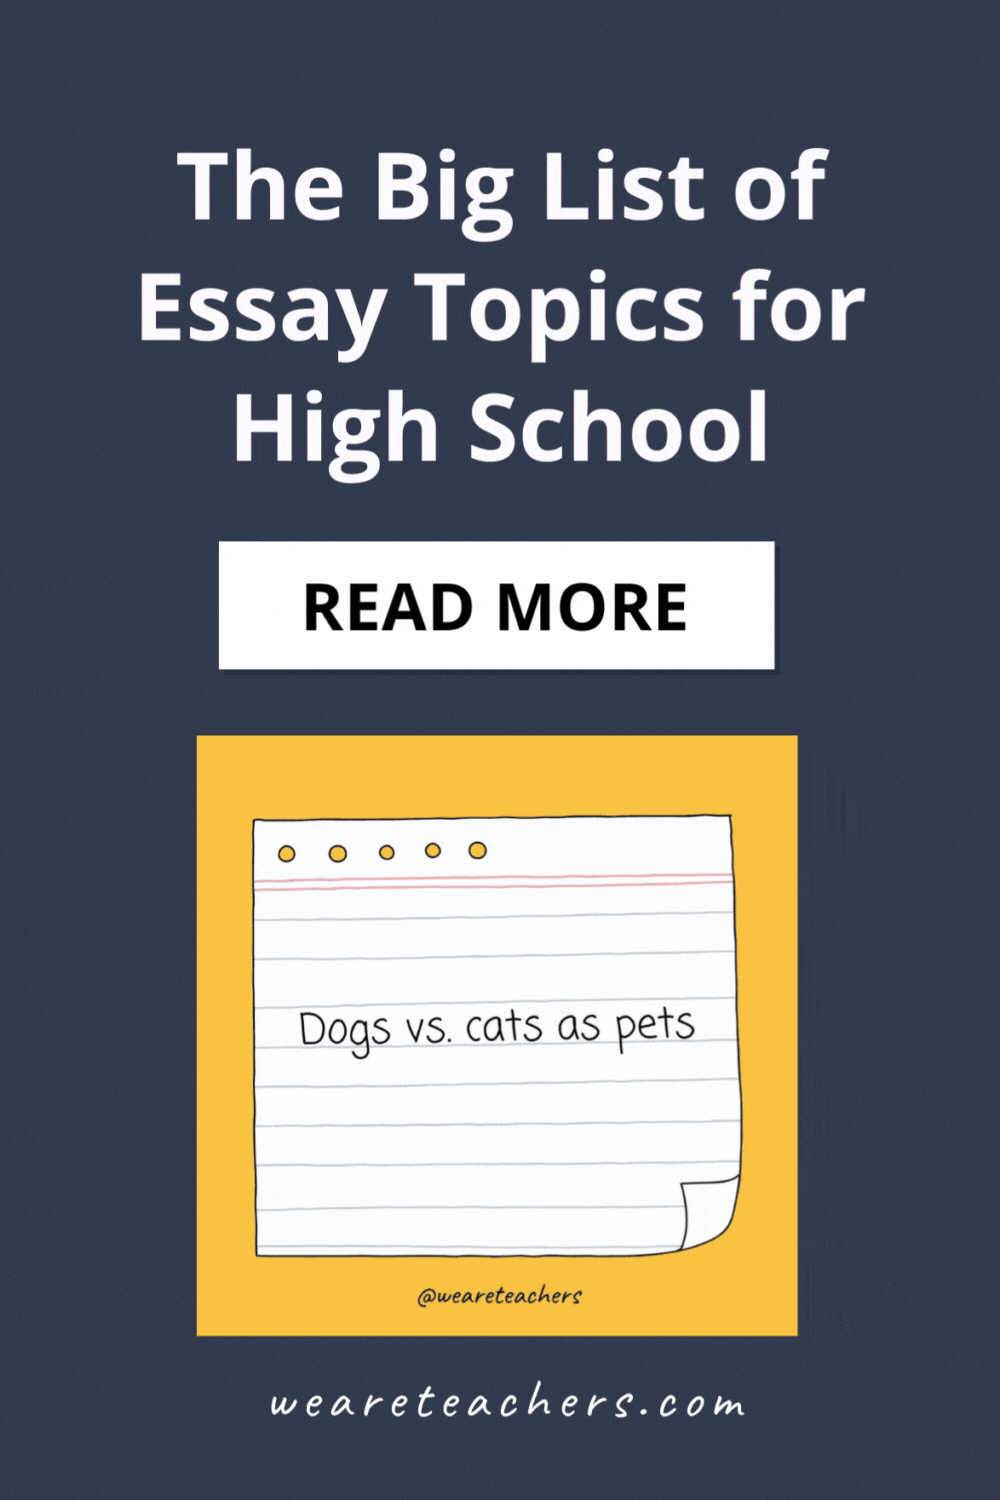 Find the best essay topics for high school: argumentative, persuasive, compare-contrast, cause-effect, narrative, and more!